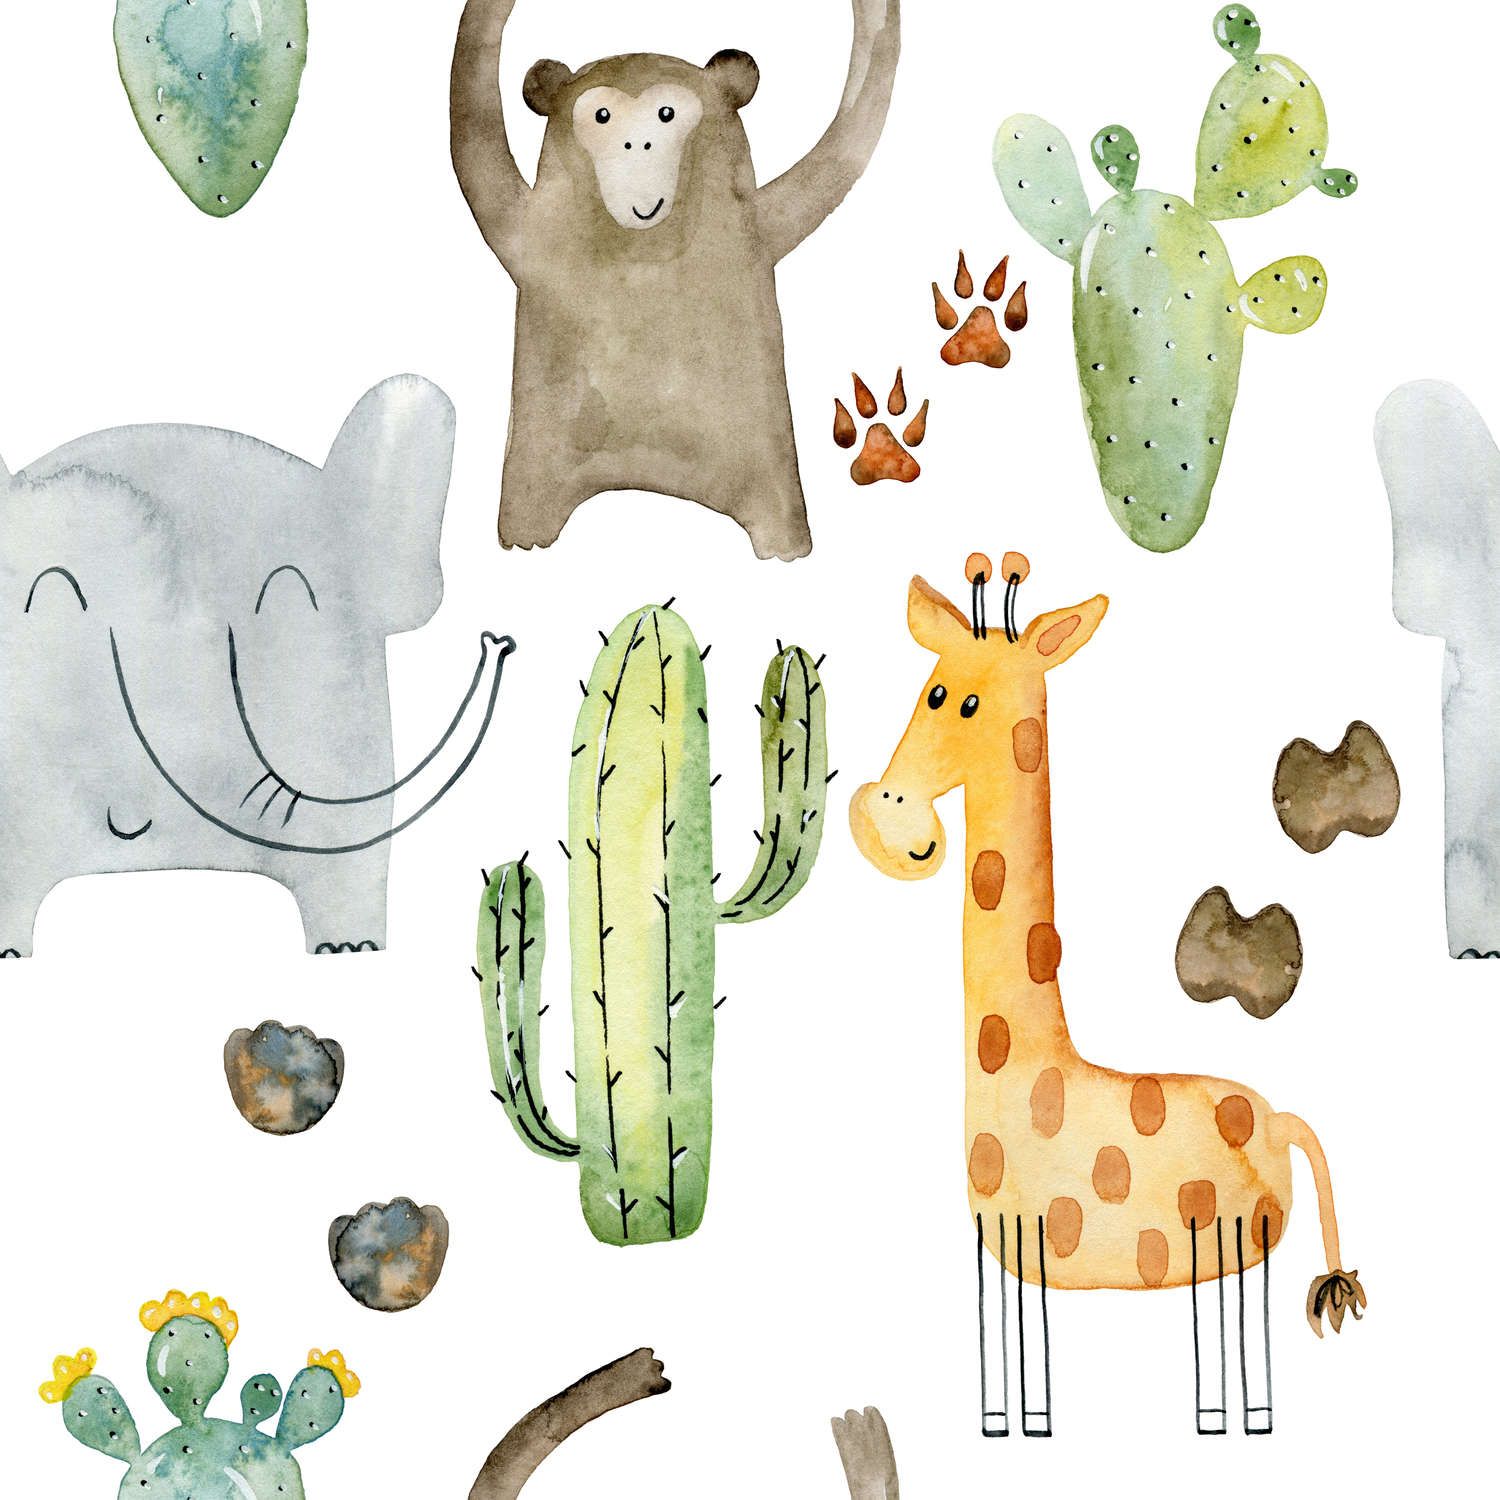             Animals and Cacti Wallpaper - Textured non-woven
        